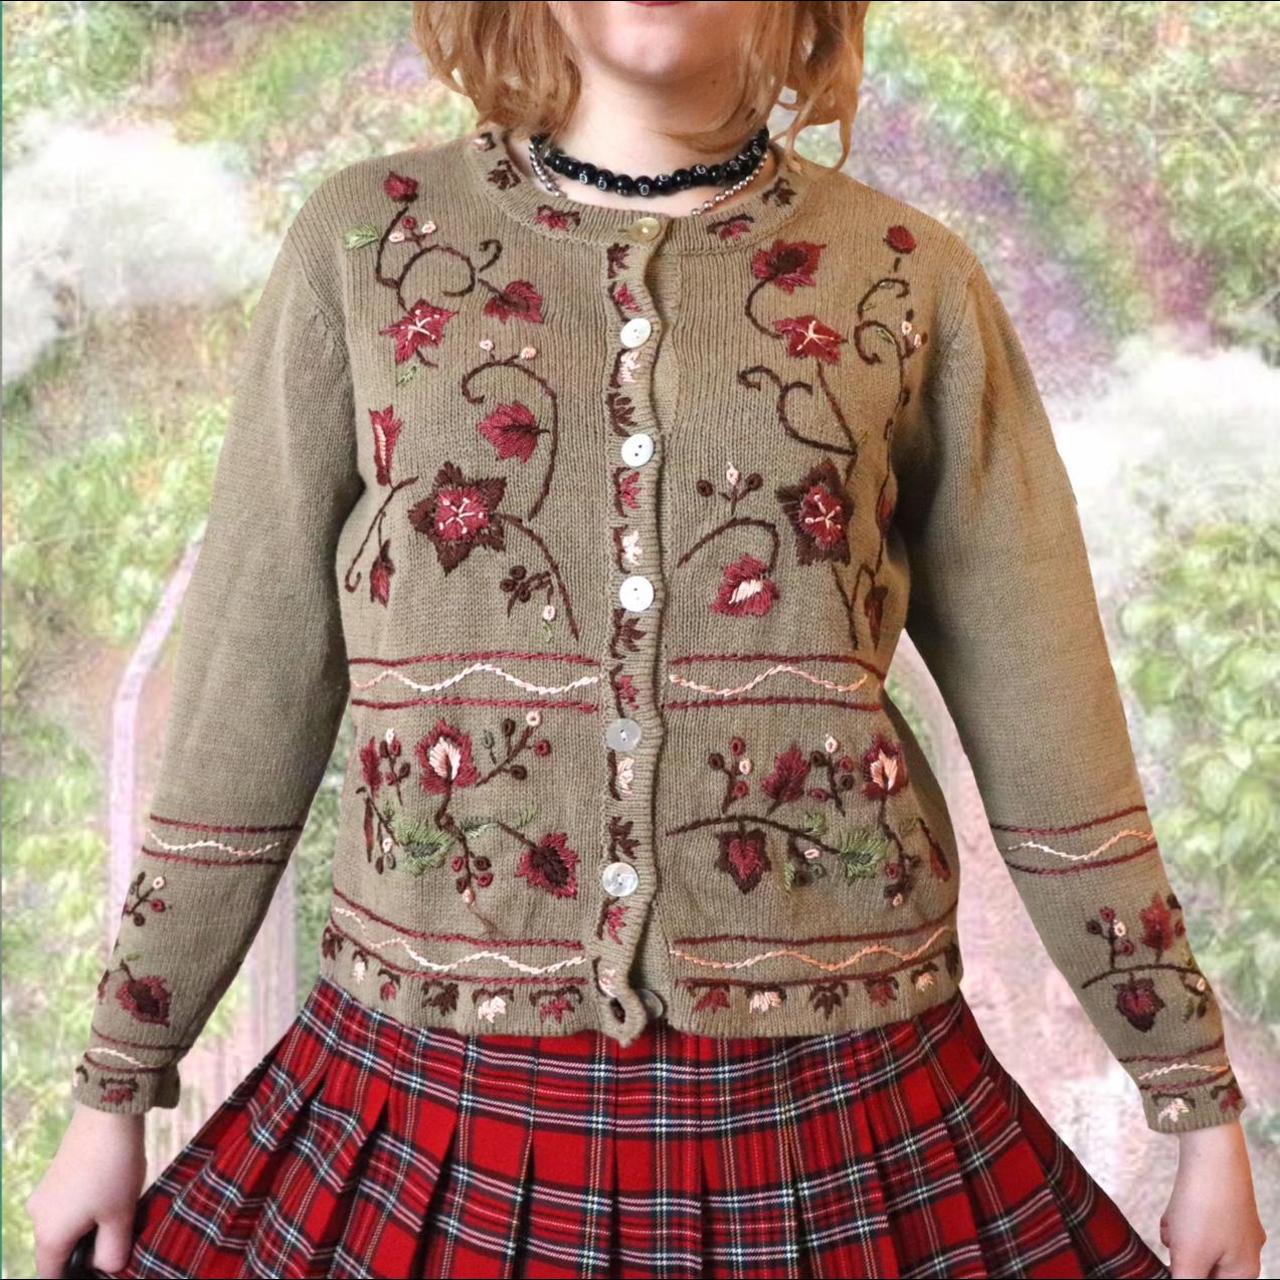 Product Image 2 - The cutest fall sweater!!! Adorable